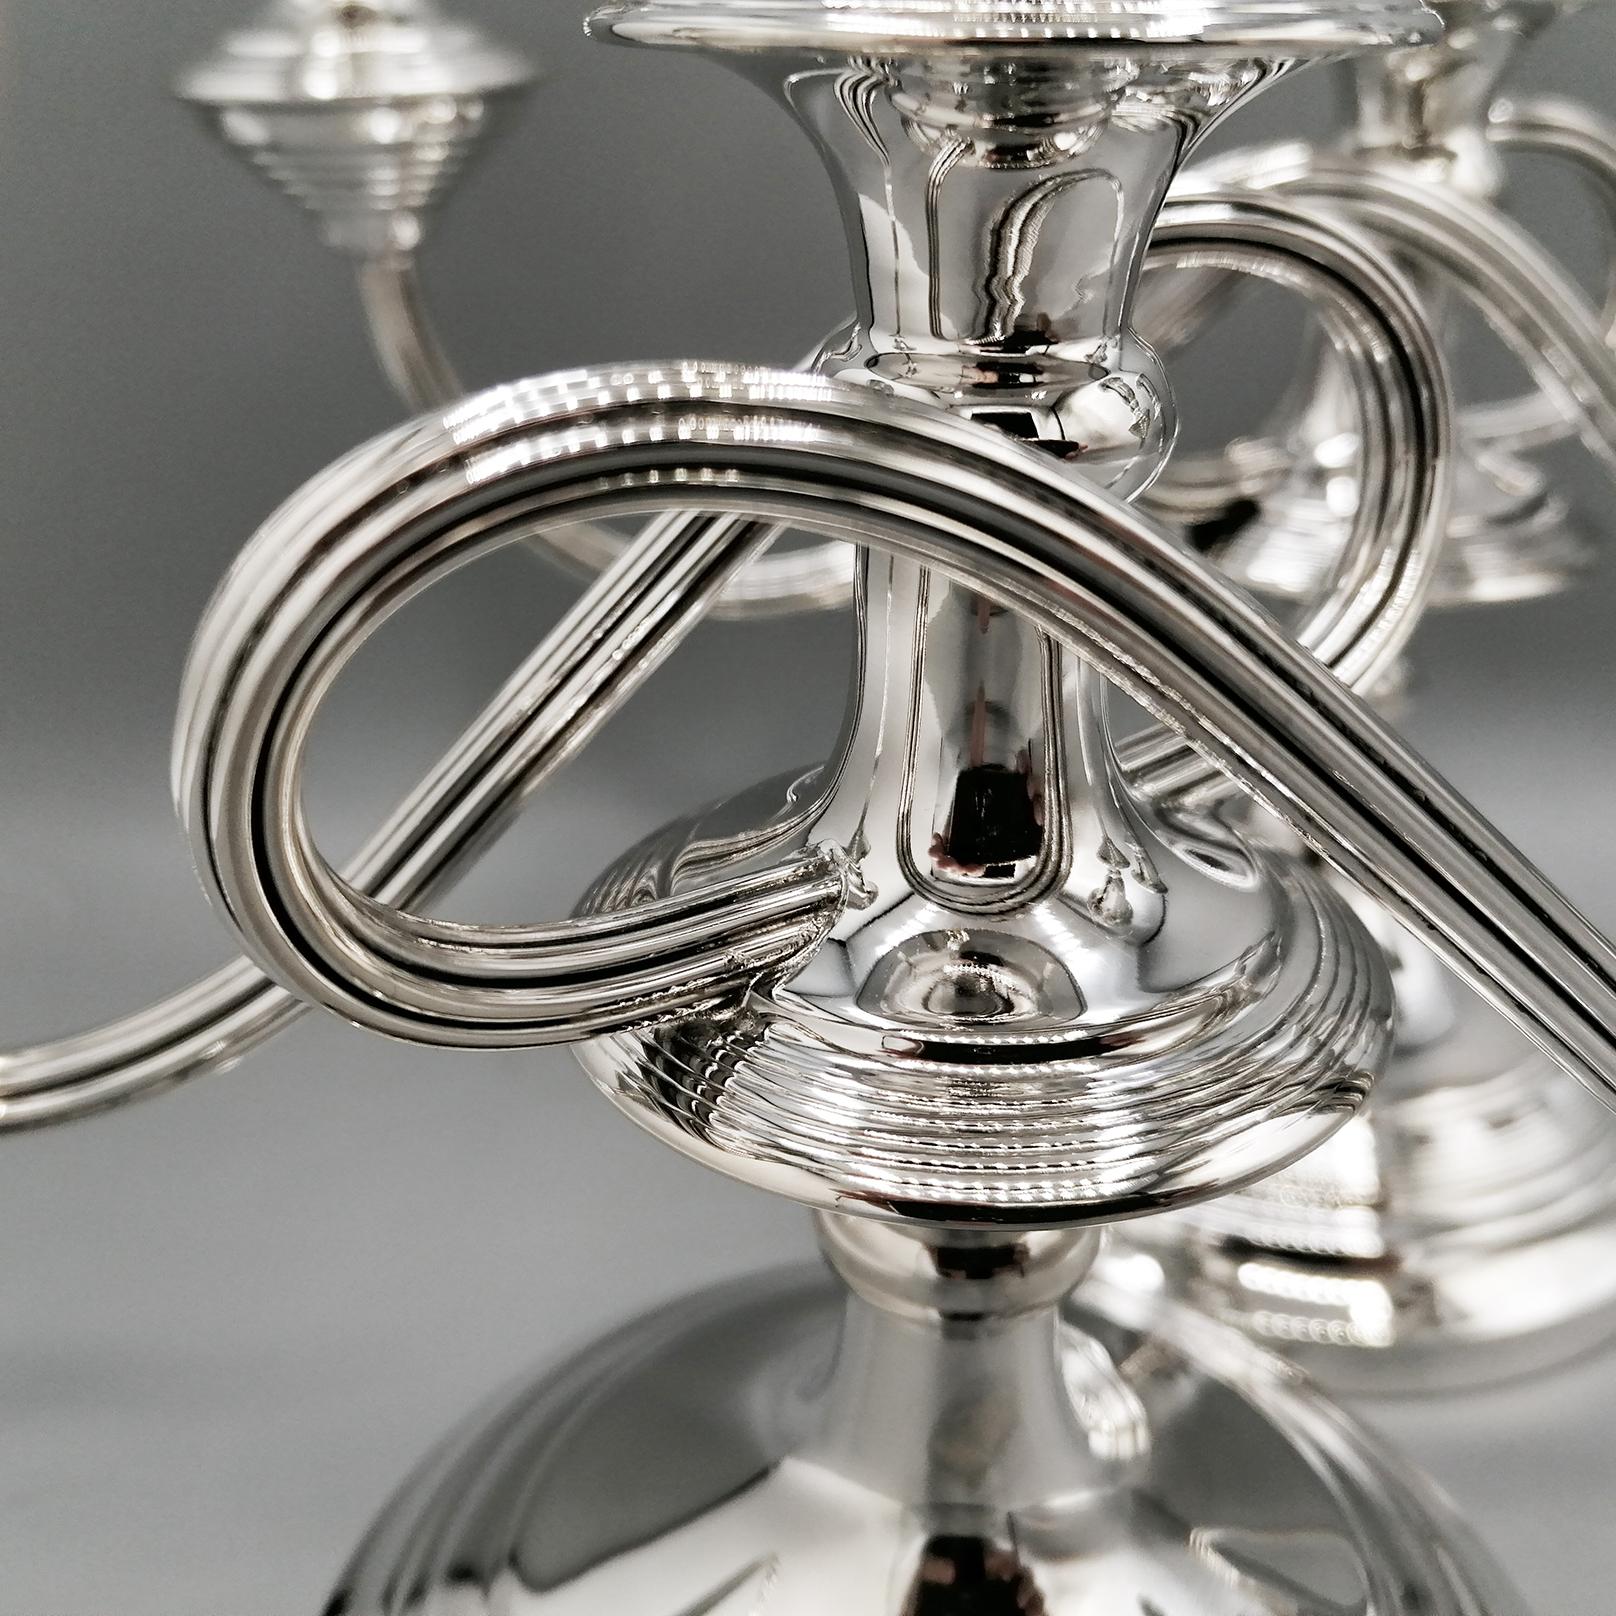 20th Century Italian solid Silver Pr. of Candelabras For Sale 1